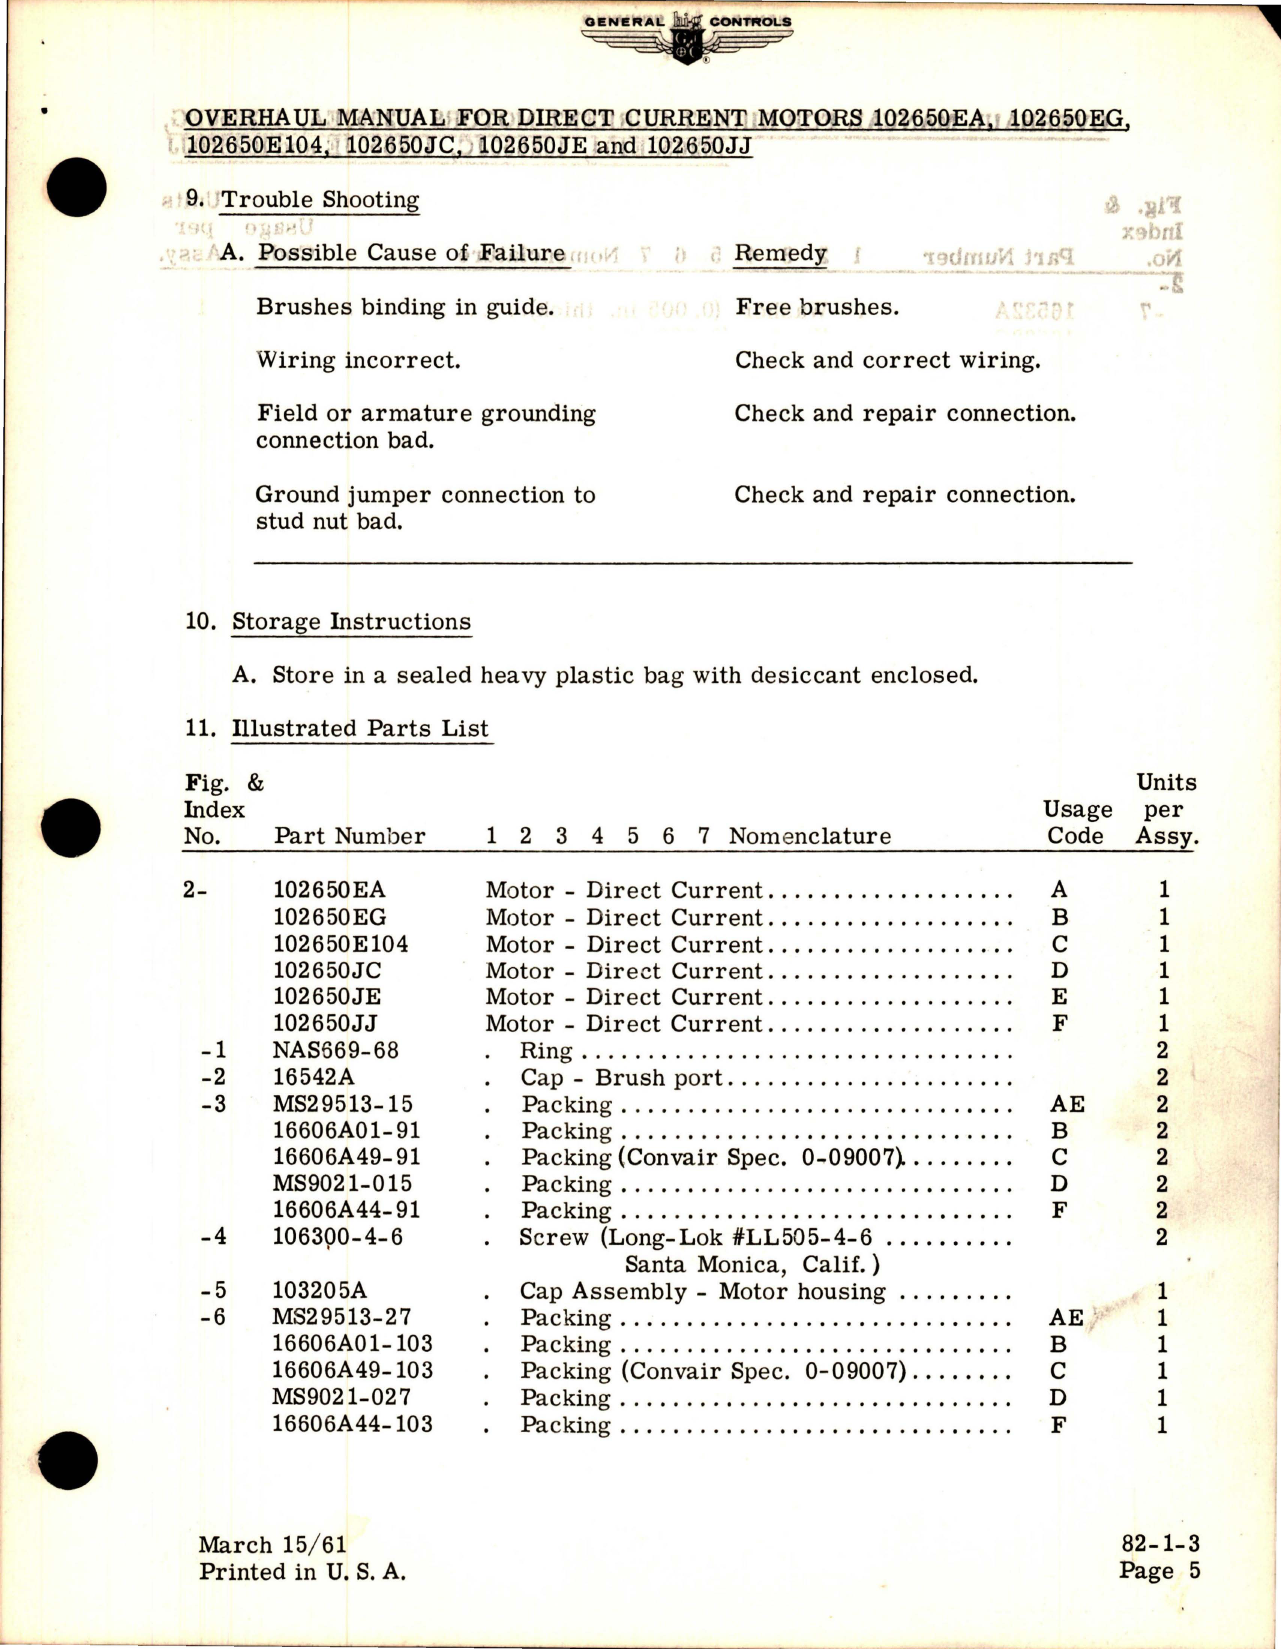 Sample page 5 from AirCorps Library document: Overhaul Manual for Direct Current Motors 